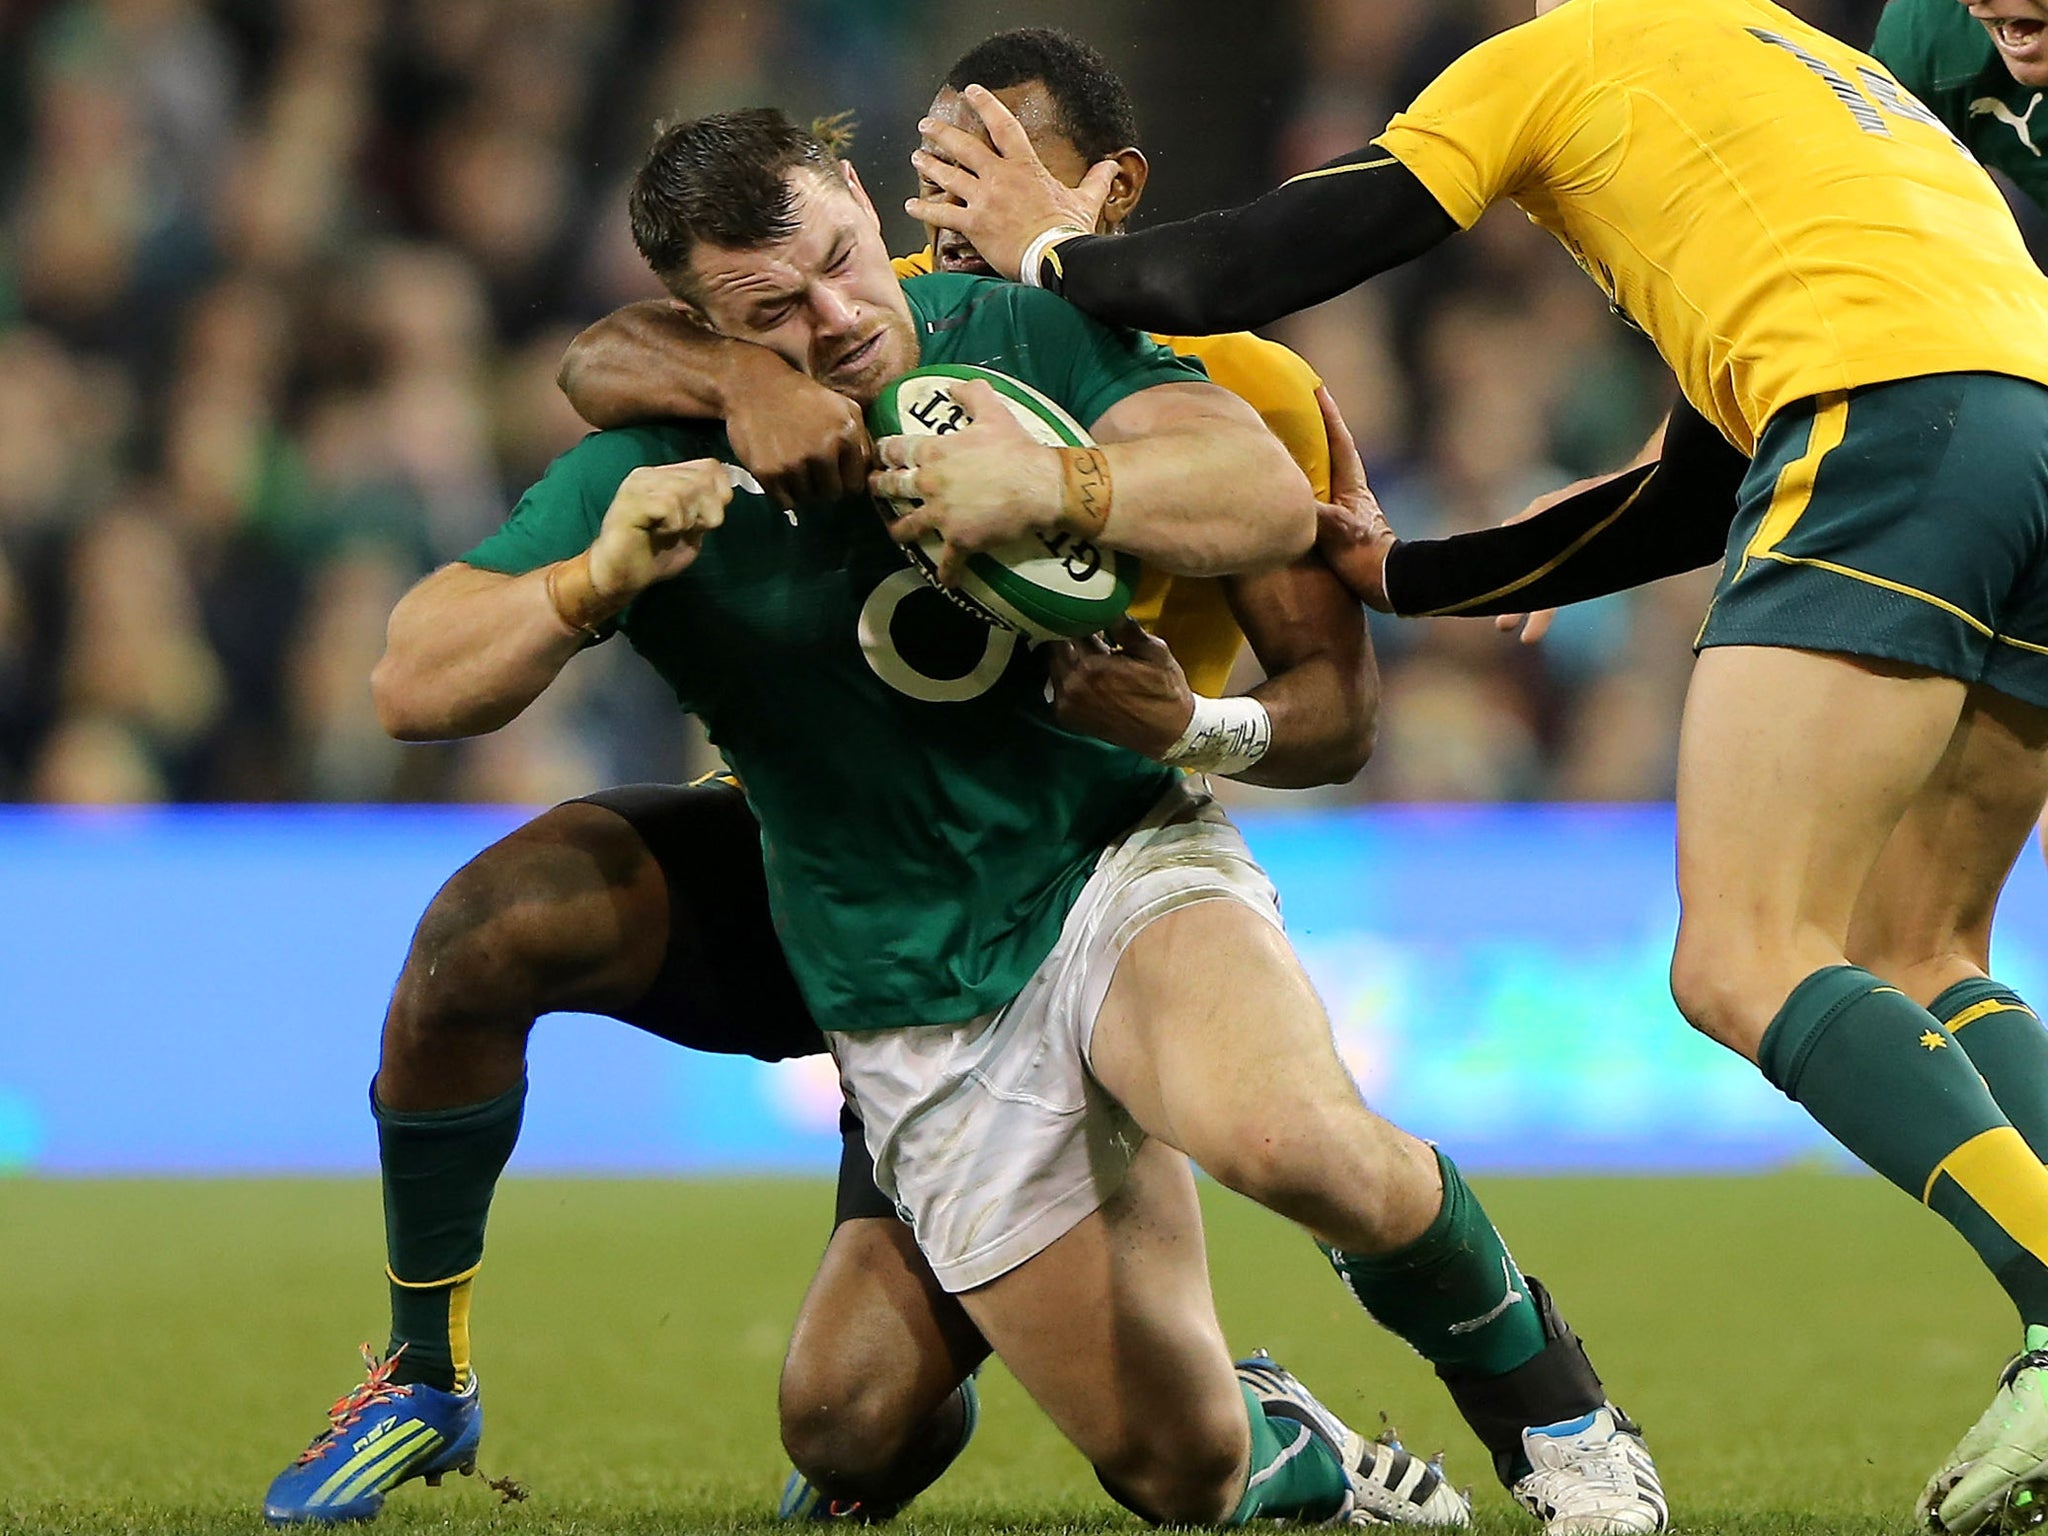 Ireland prop Cian Healy has been ruled out for eight weeks after undergoing ankle surgery